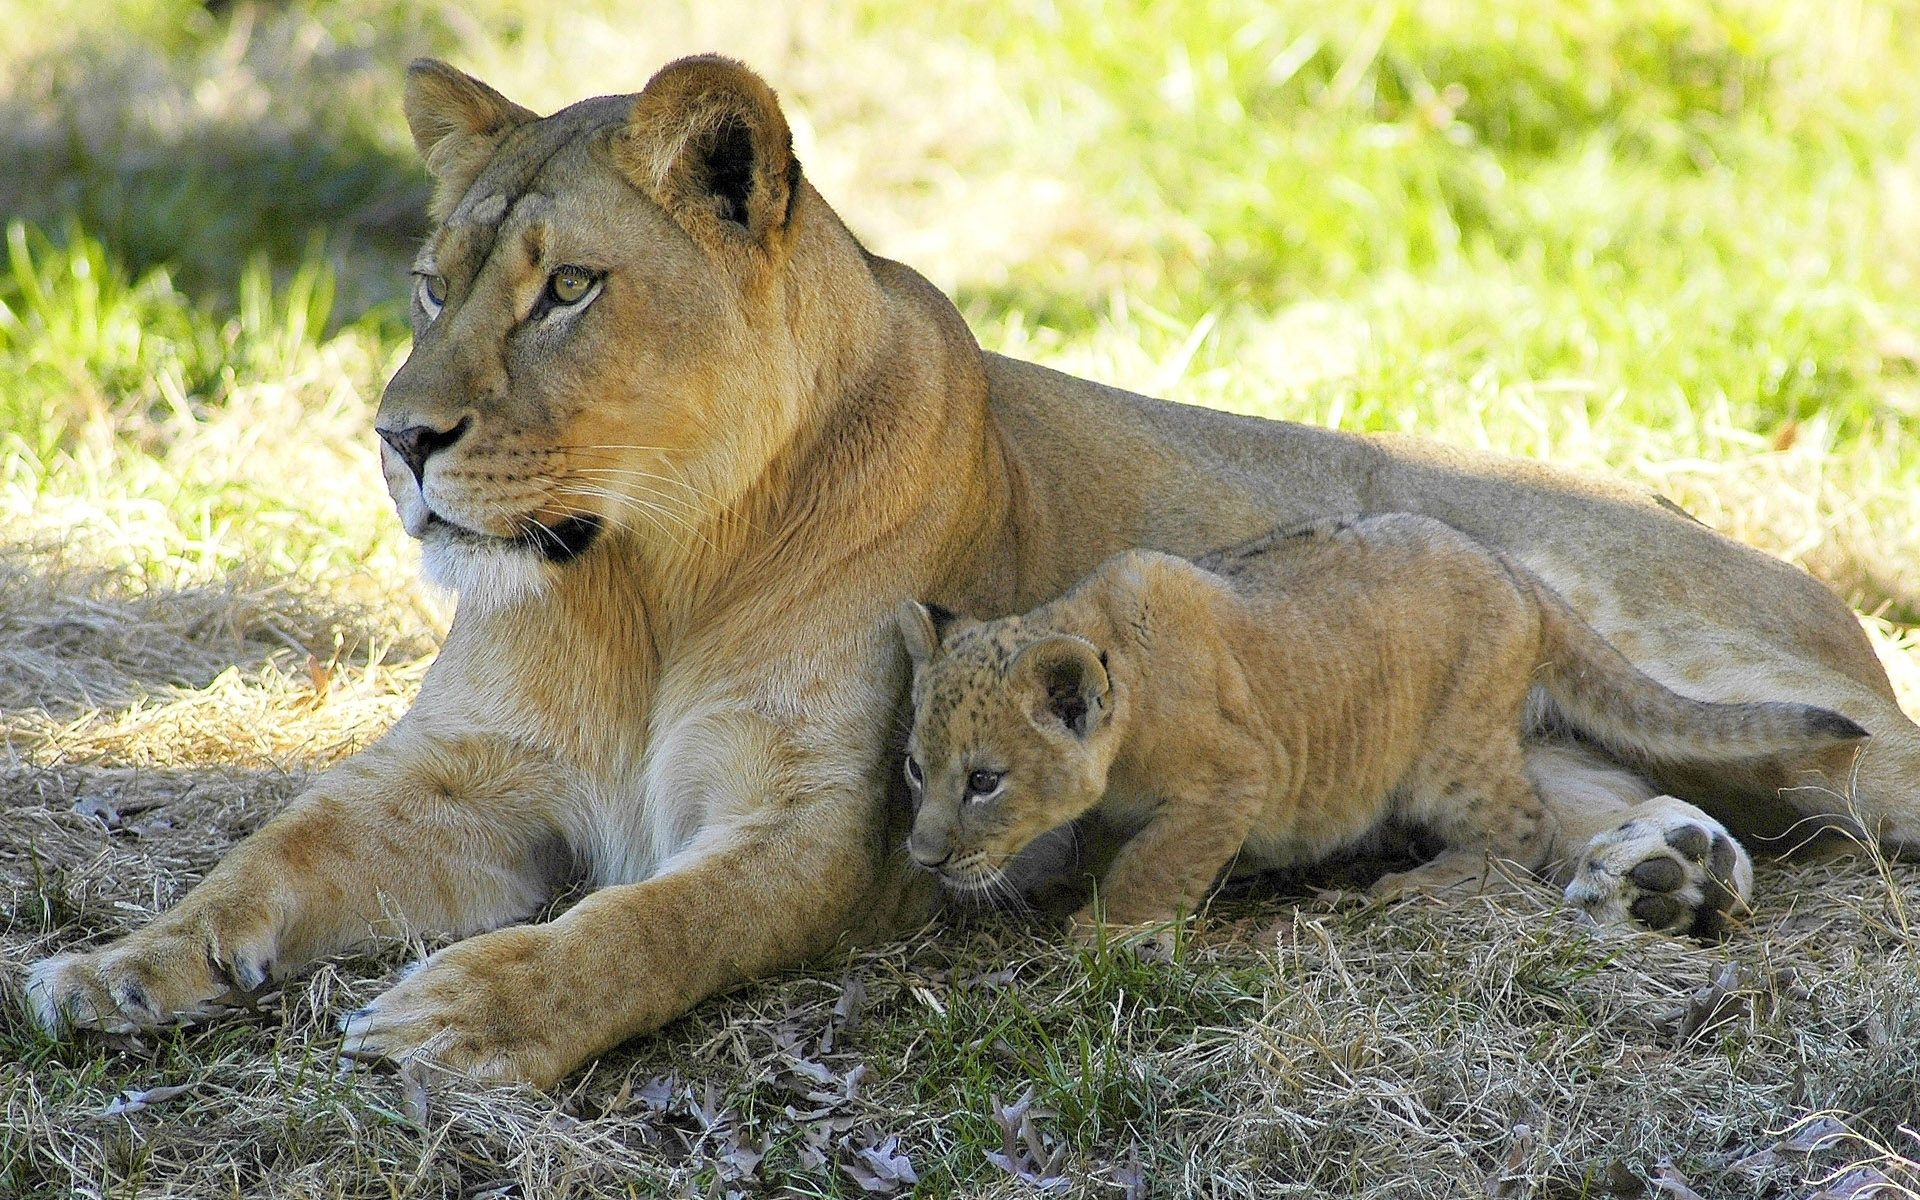 Lioness and the baby